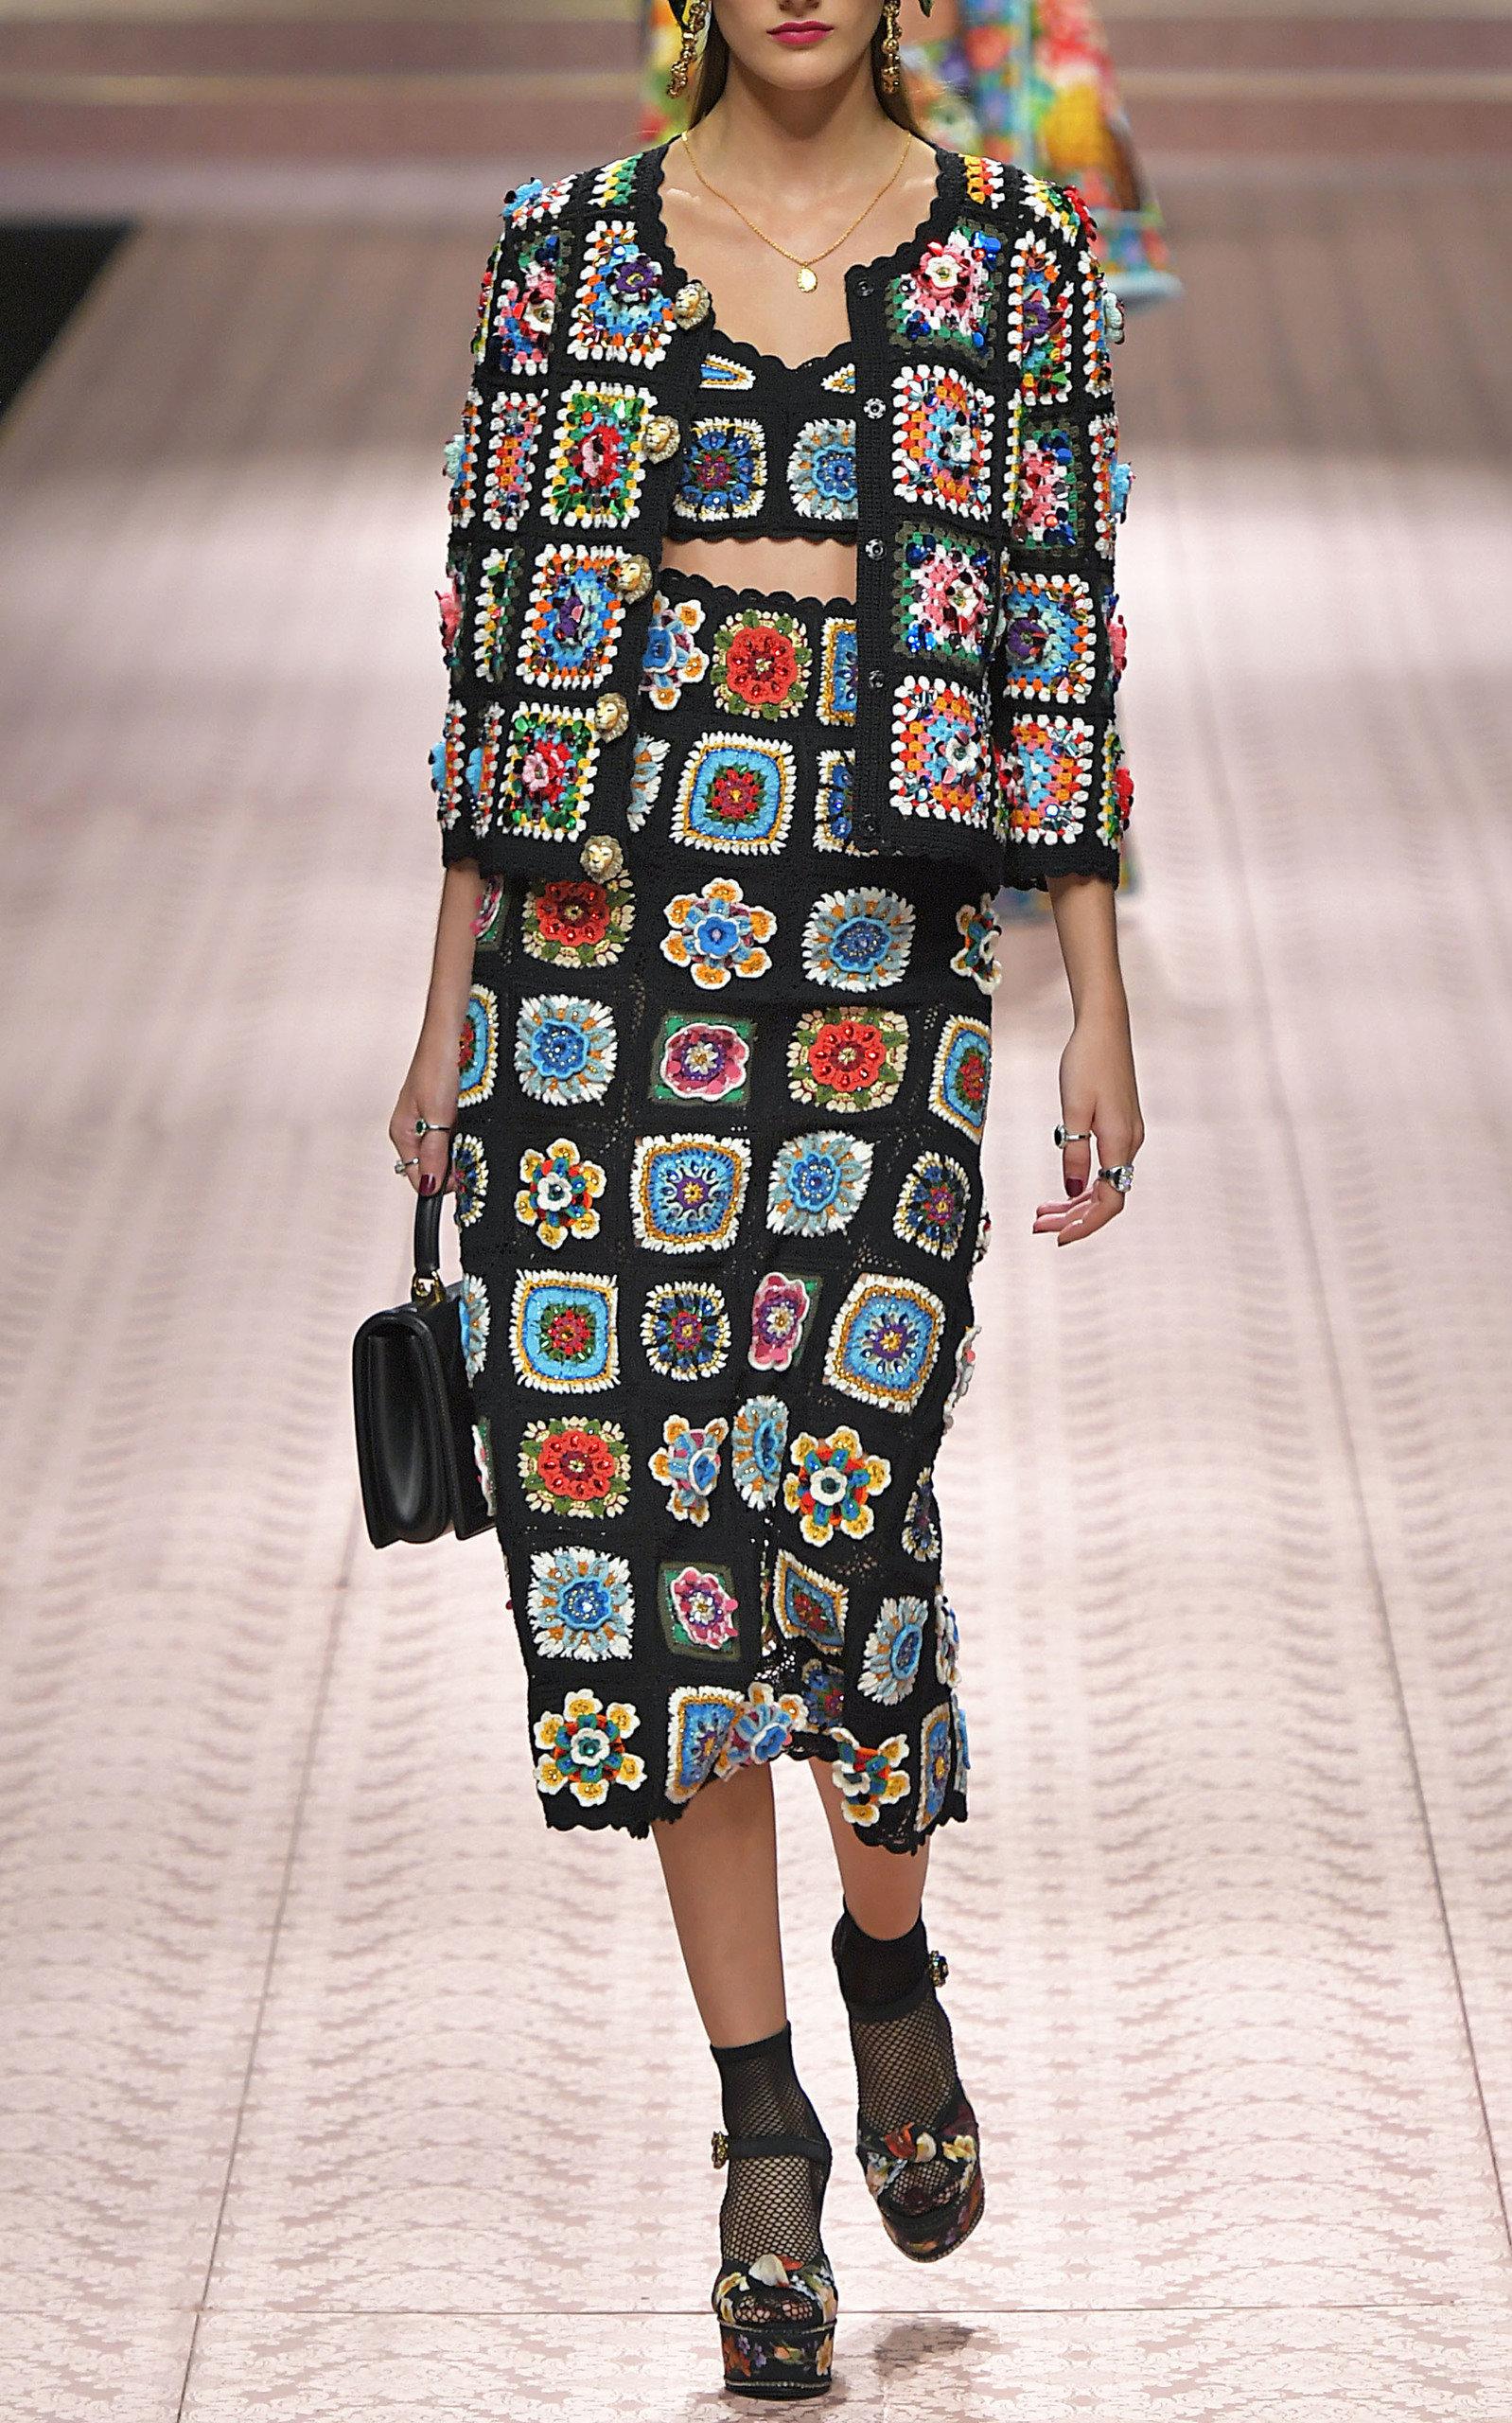 dolce and gabbana granny square jacket